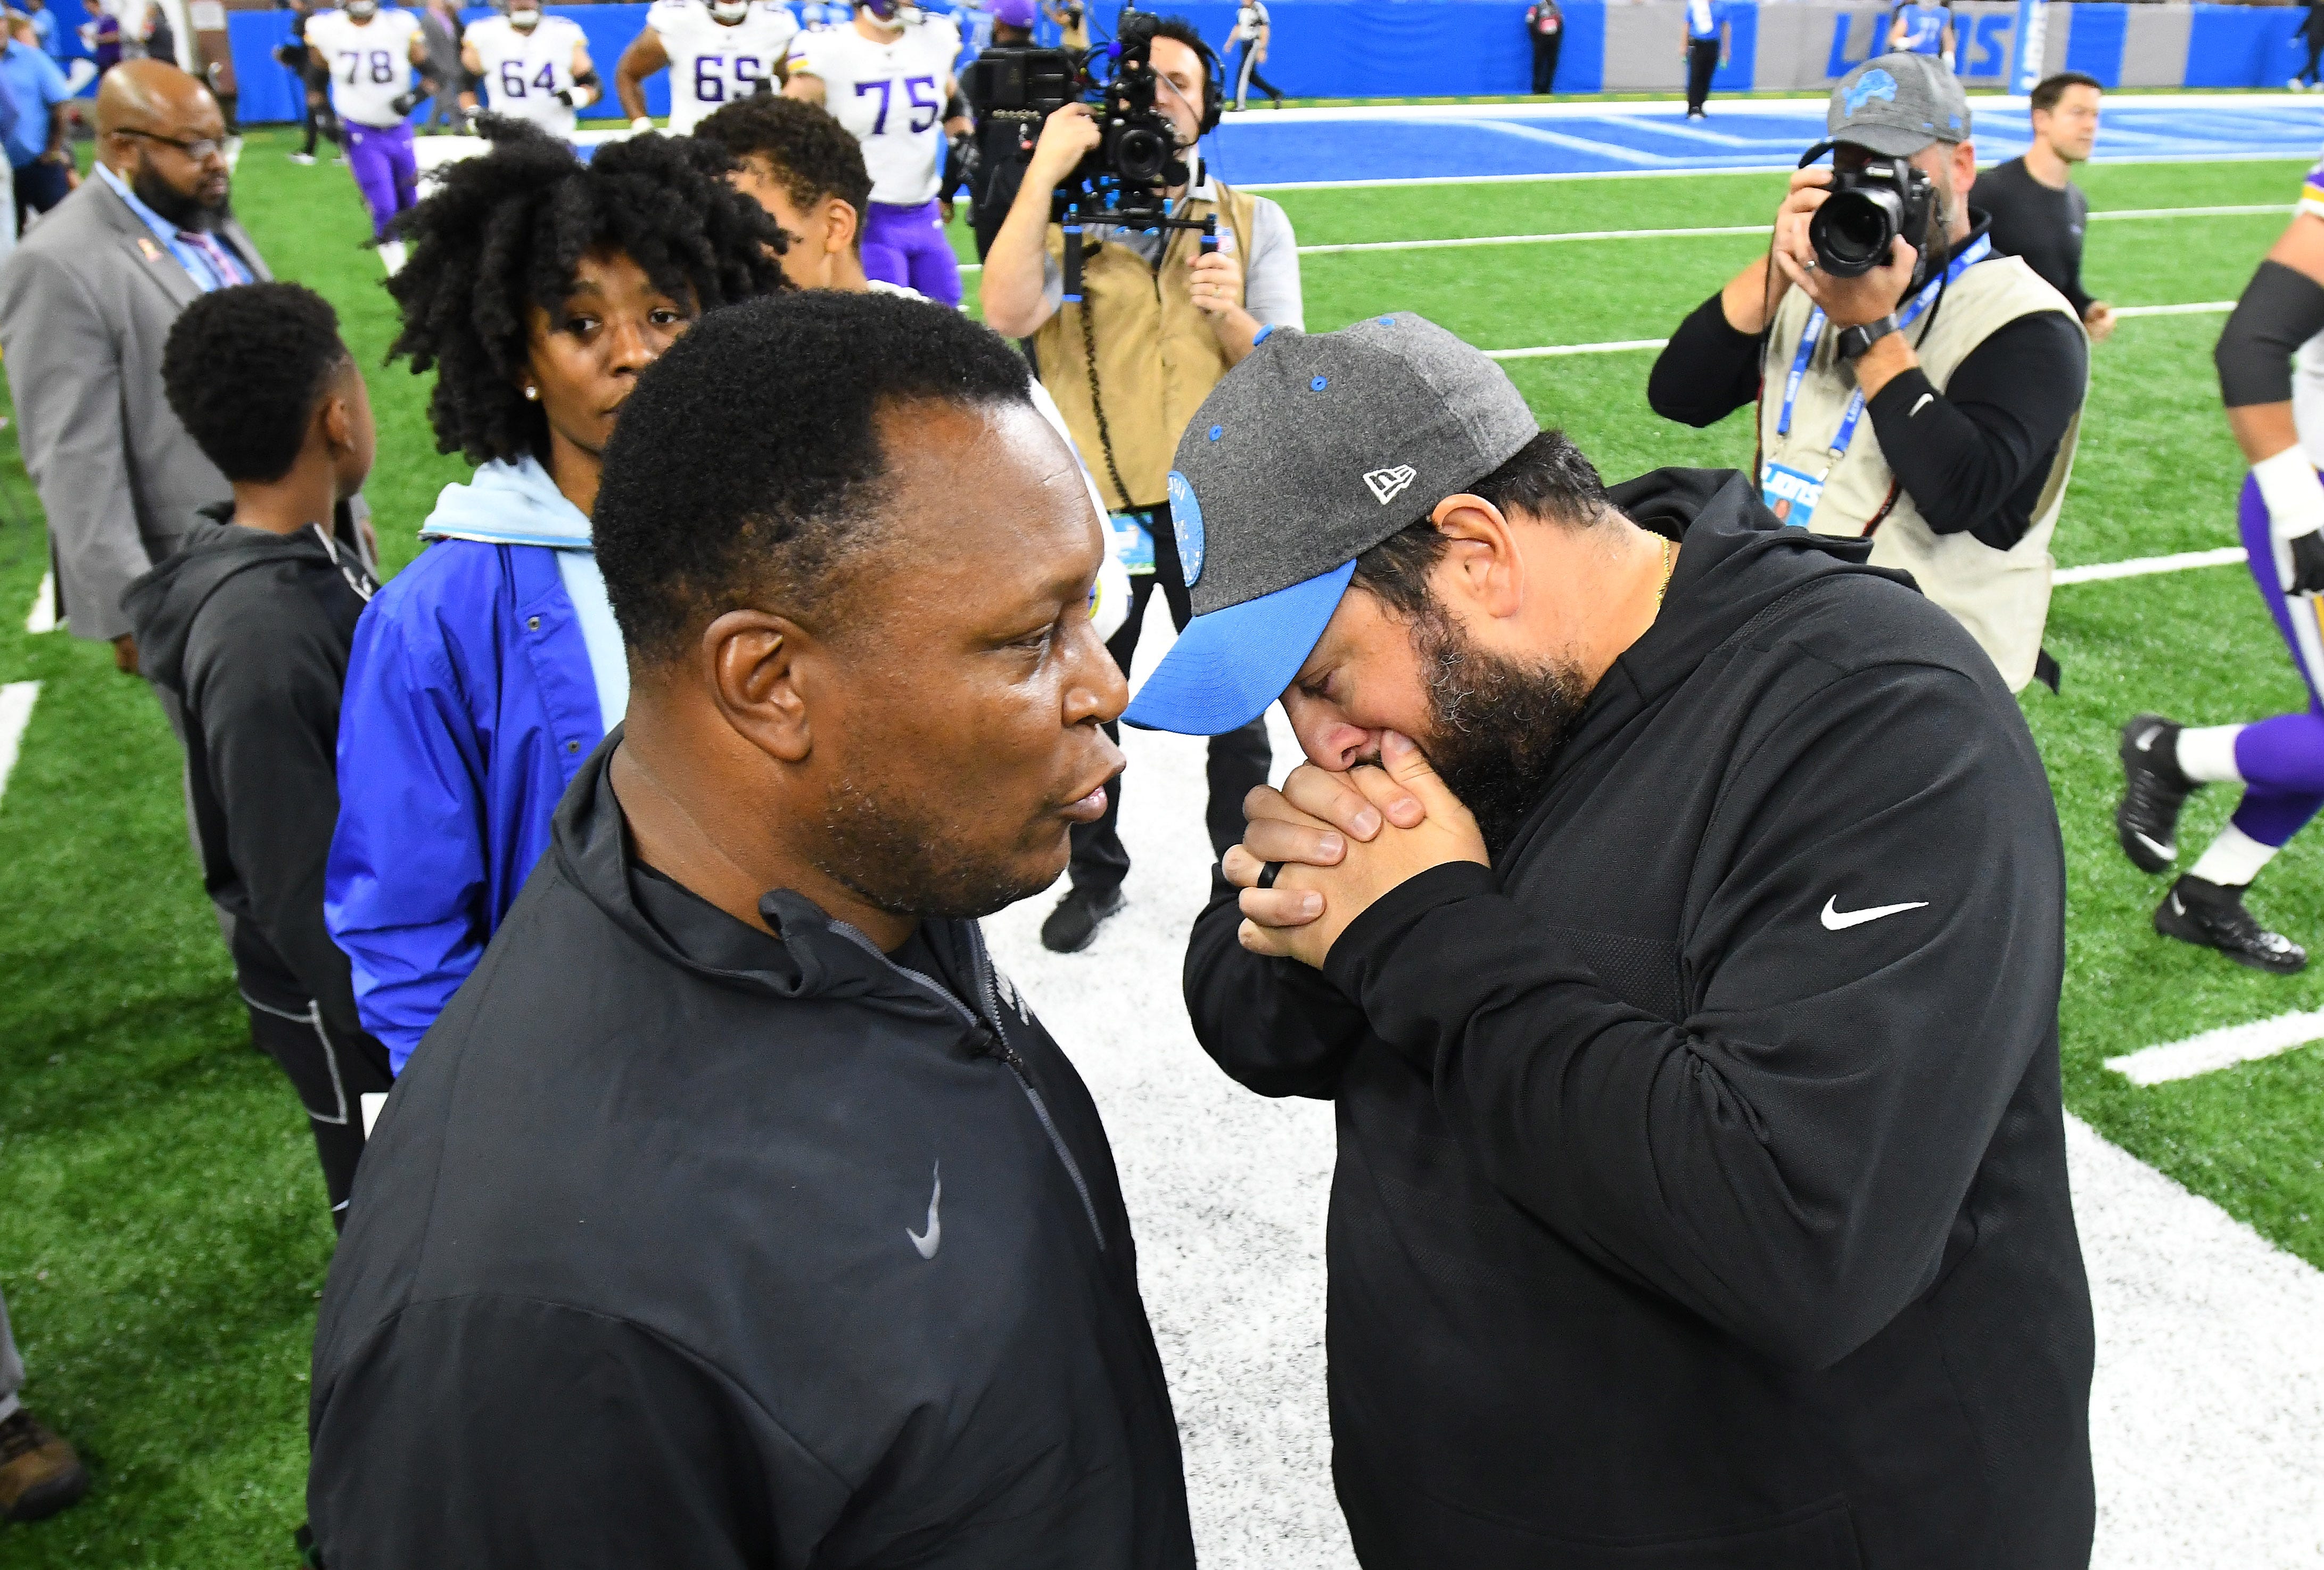 NFL Hall of Fame running back Barry Sanders and Lions head coach Matt Patricia, who covers his mouth as he talks, chat on the sidelines before the game.